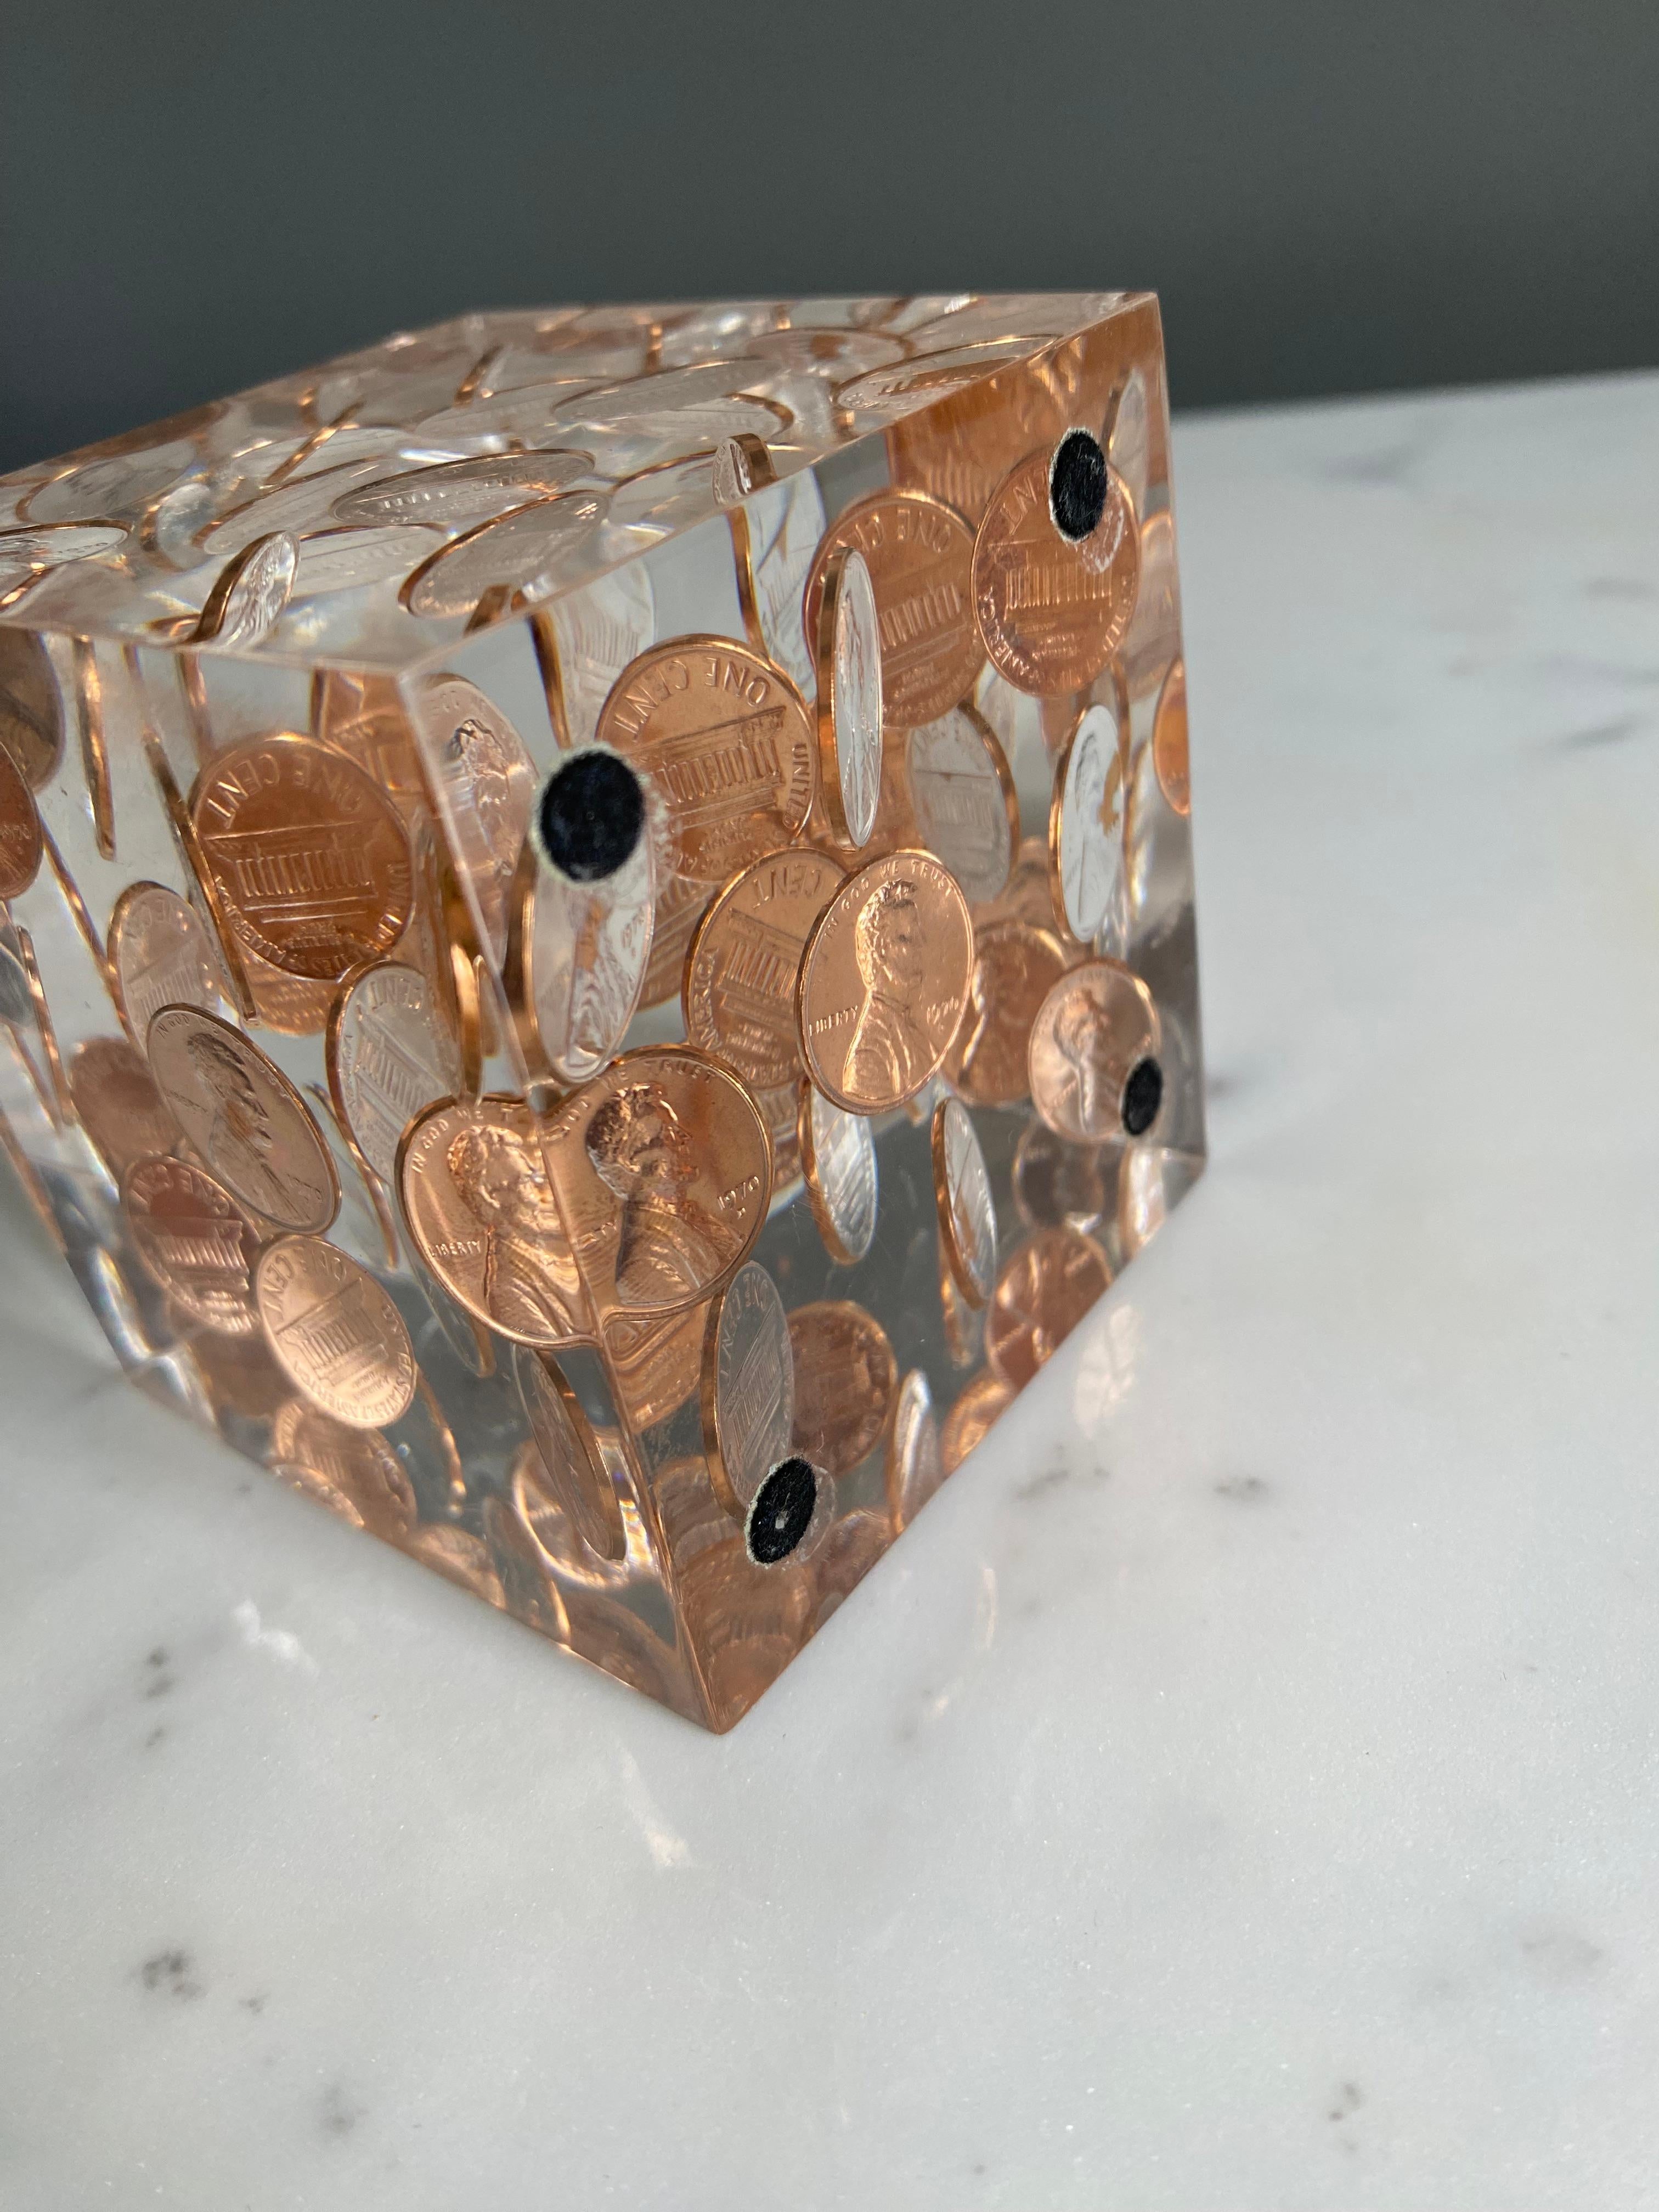 Acrylic Floating 1970's Pennies in Lucite Cube Paperweight / Sculpture